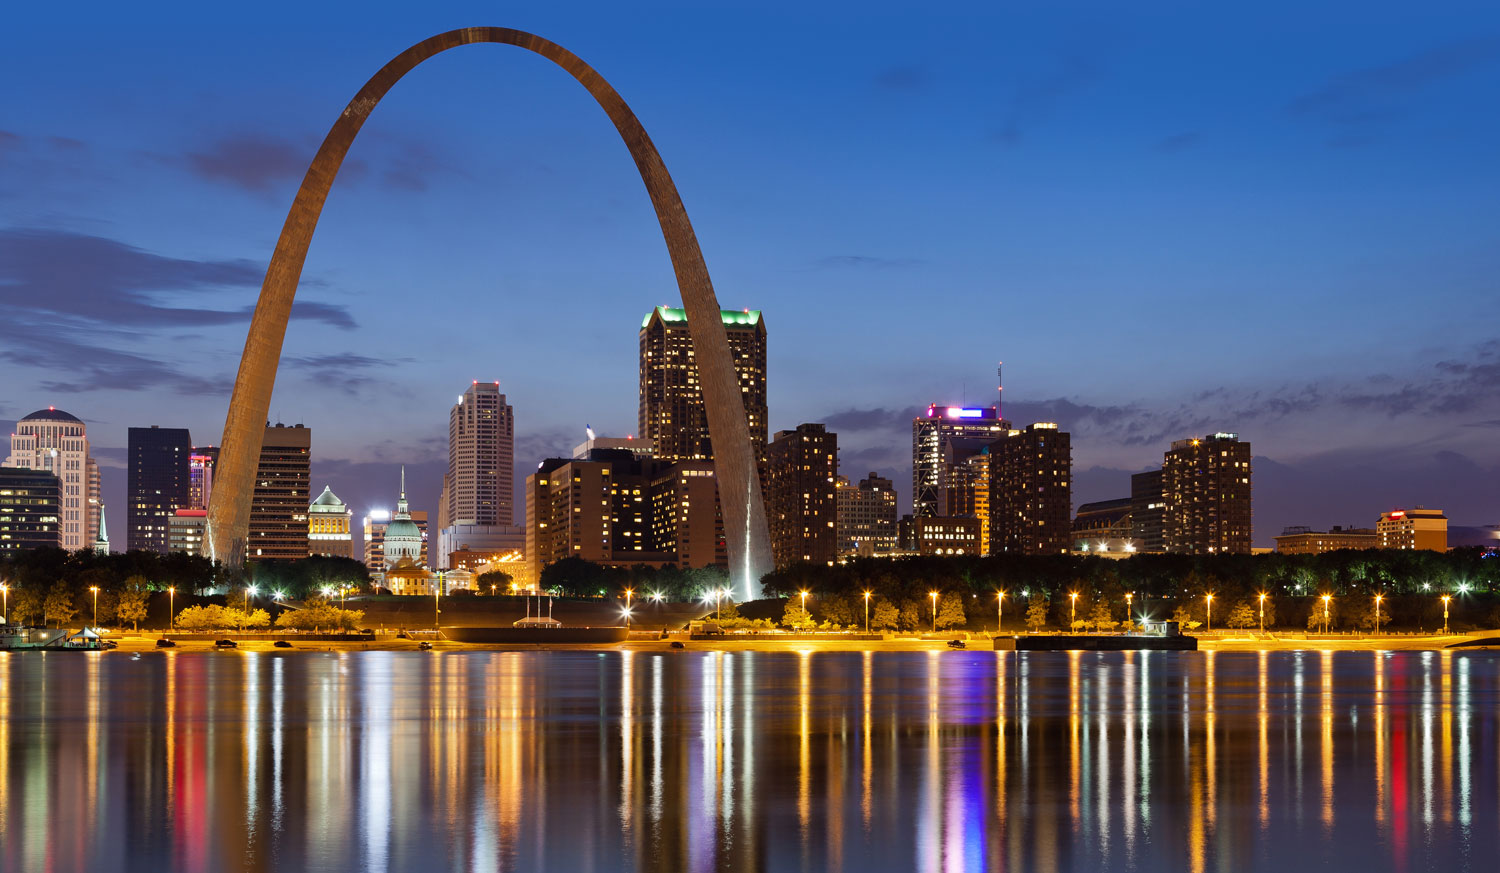 St Louis skyline at night, reflections in River. rudi1976 - Fotolia 41474552